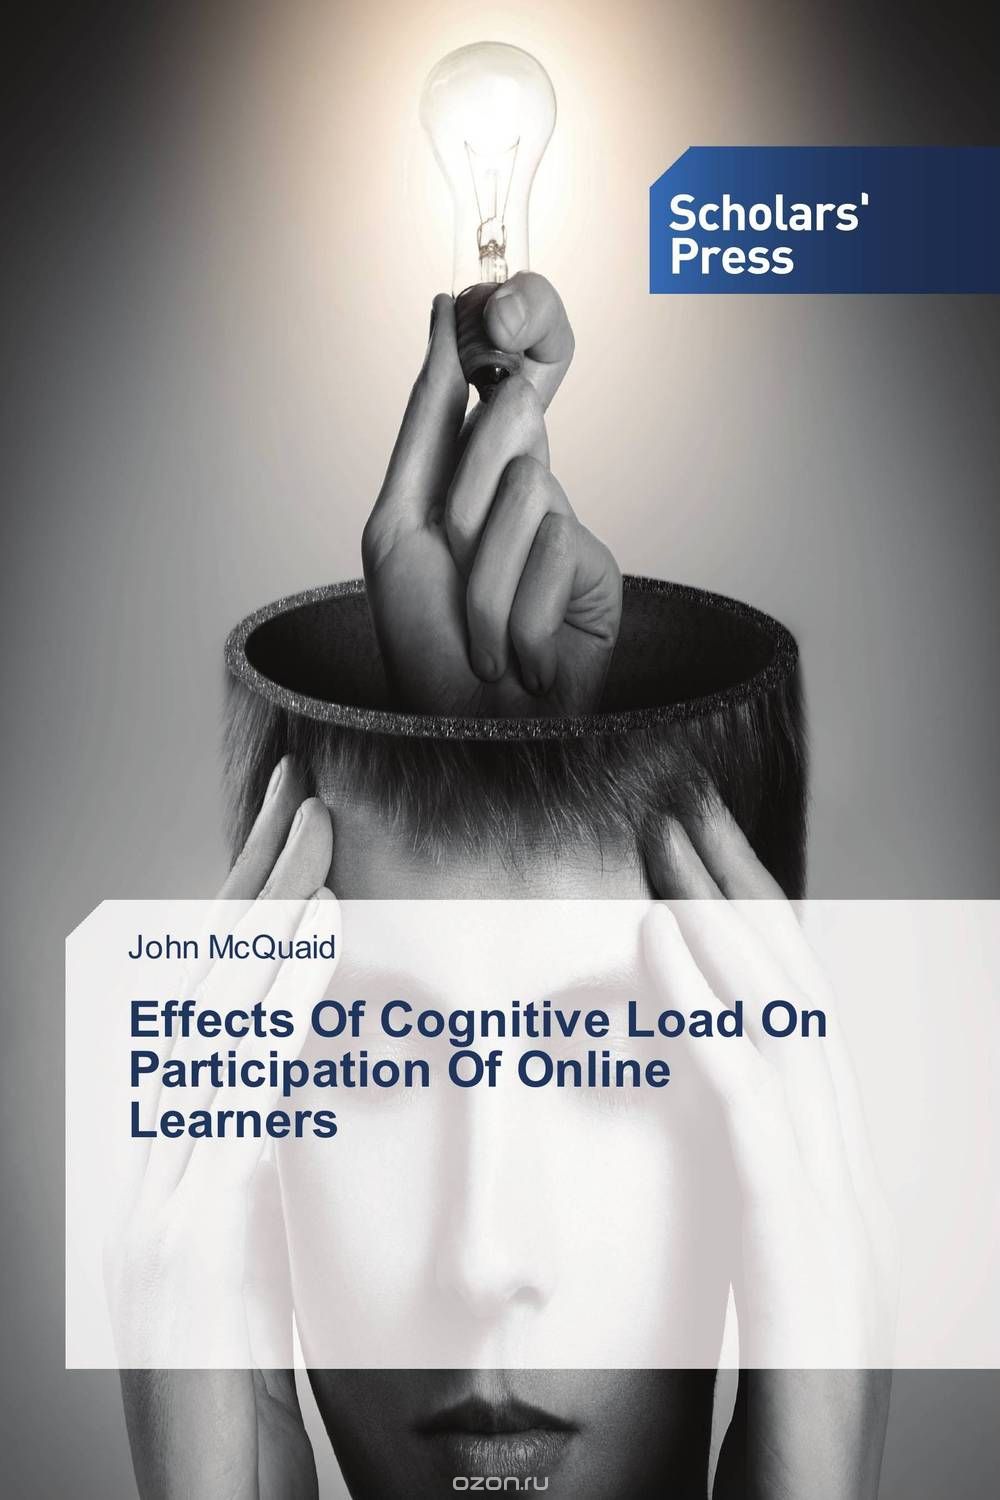 Скачать книгу "Effects Of Cognitive Load On Participation Of Online Learners"